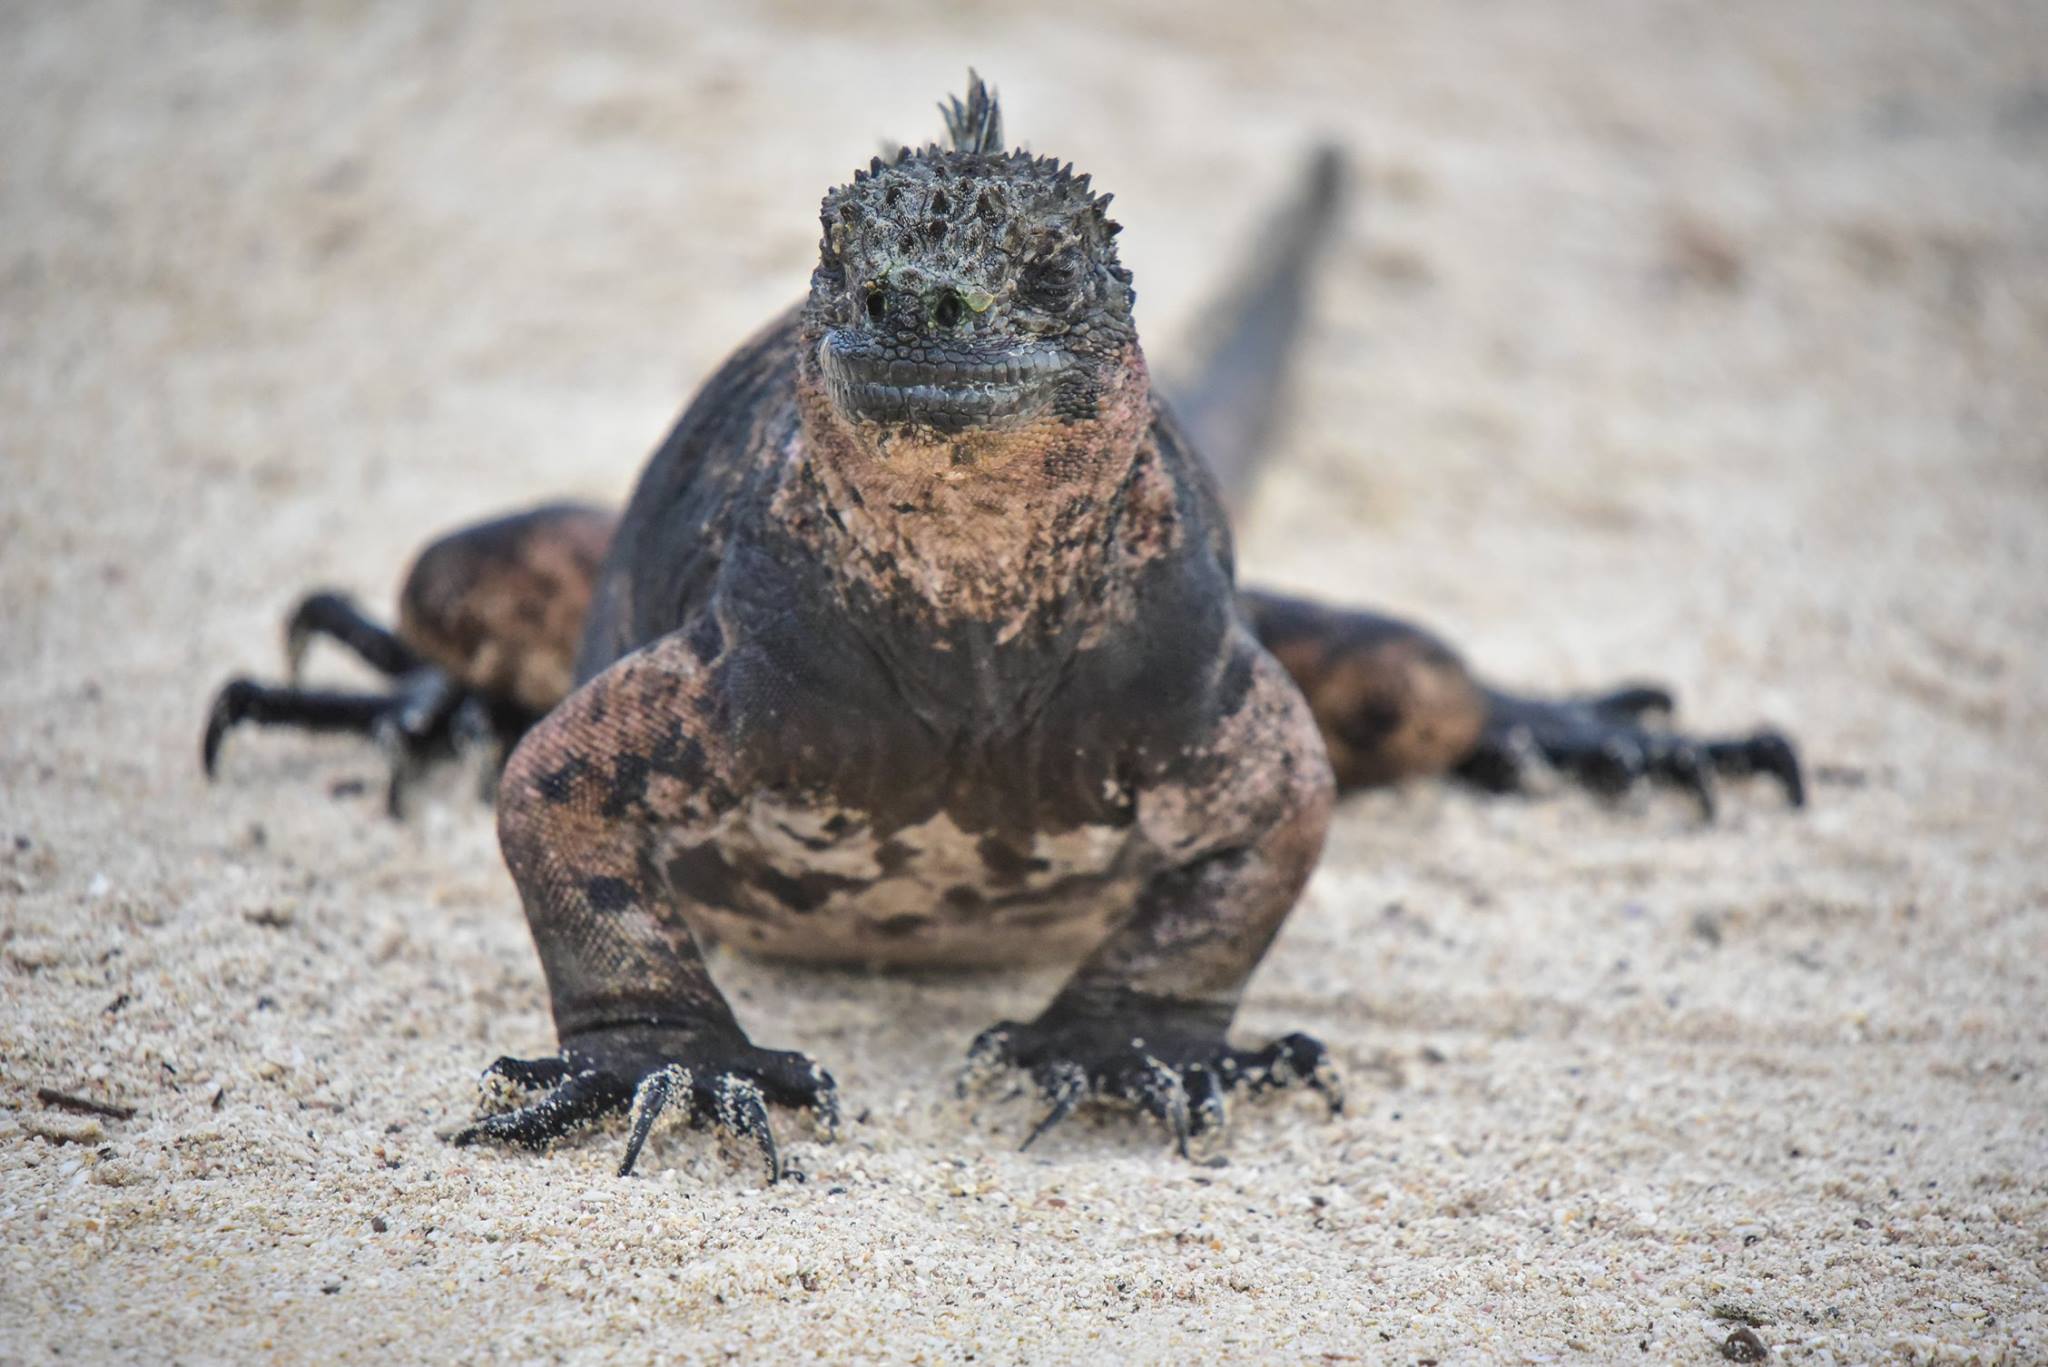 Despite boasting some of the planet’s youngest islands, there is an ancientness about the Galapagos Islands, a remote and fragile chain that’s home to some of the world’s strangest yet most endearing inhabitants.